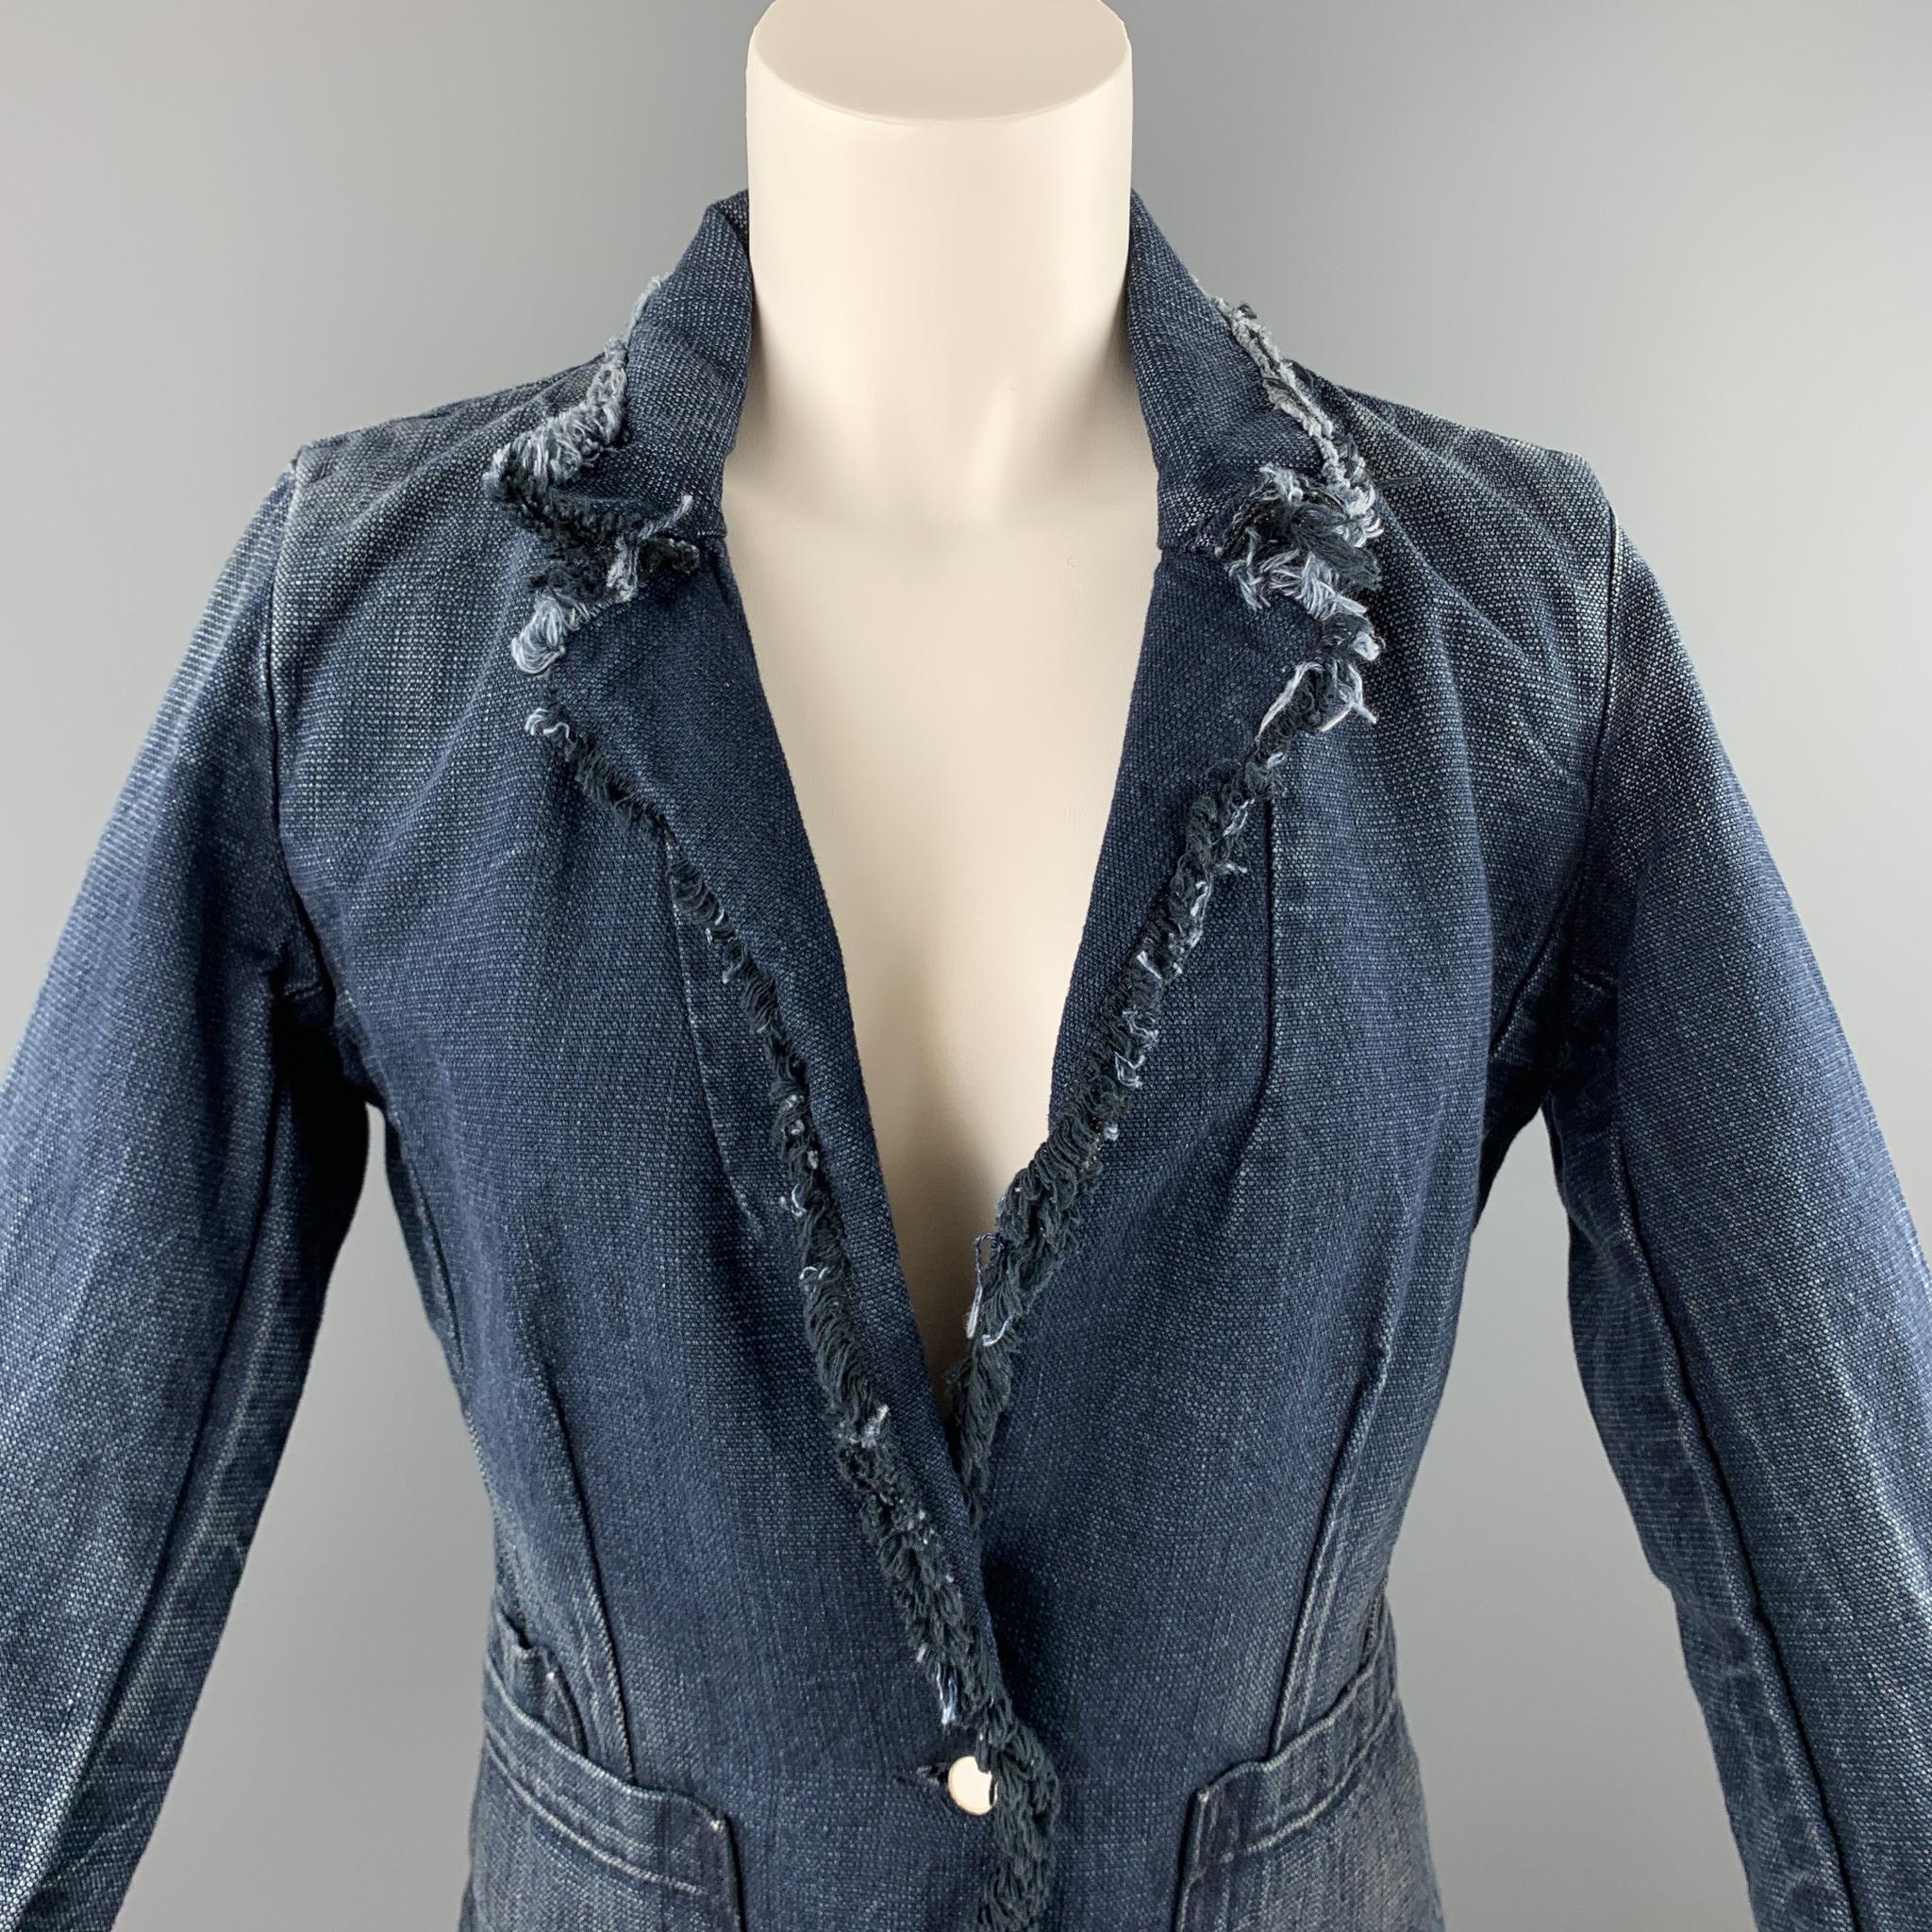 TORTOISE blazer comes in a navy distressed denim with raw hem edges featuring a notch lapel, patch pockets, and a single button closure. 

Very Good Pre-Owned Condition.
Marked: S

Measurements:

Shoulder: 15 in. 
Bust: 36 in. 
Sleeve: 38 in.